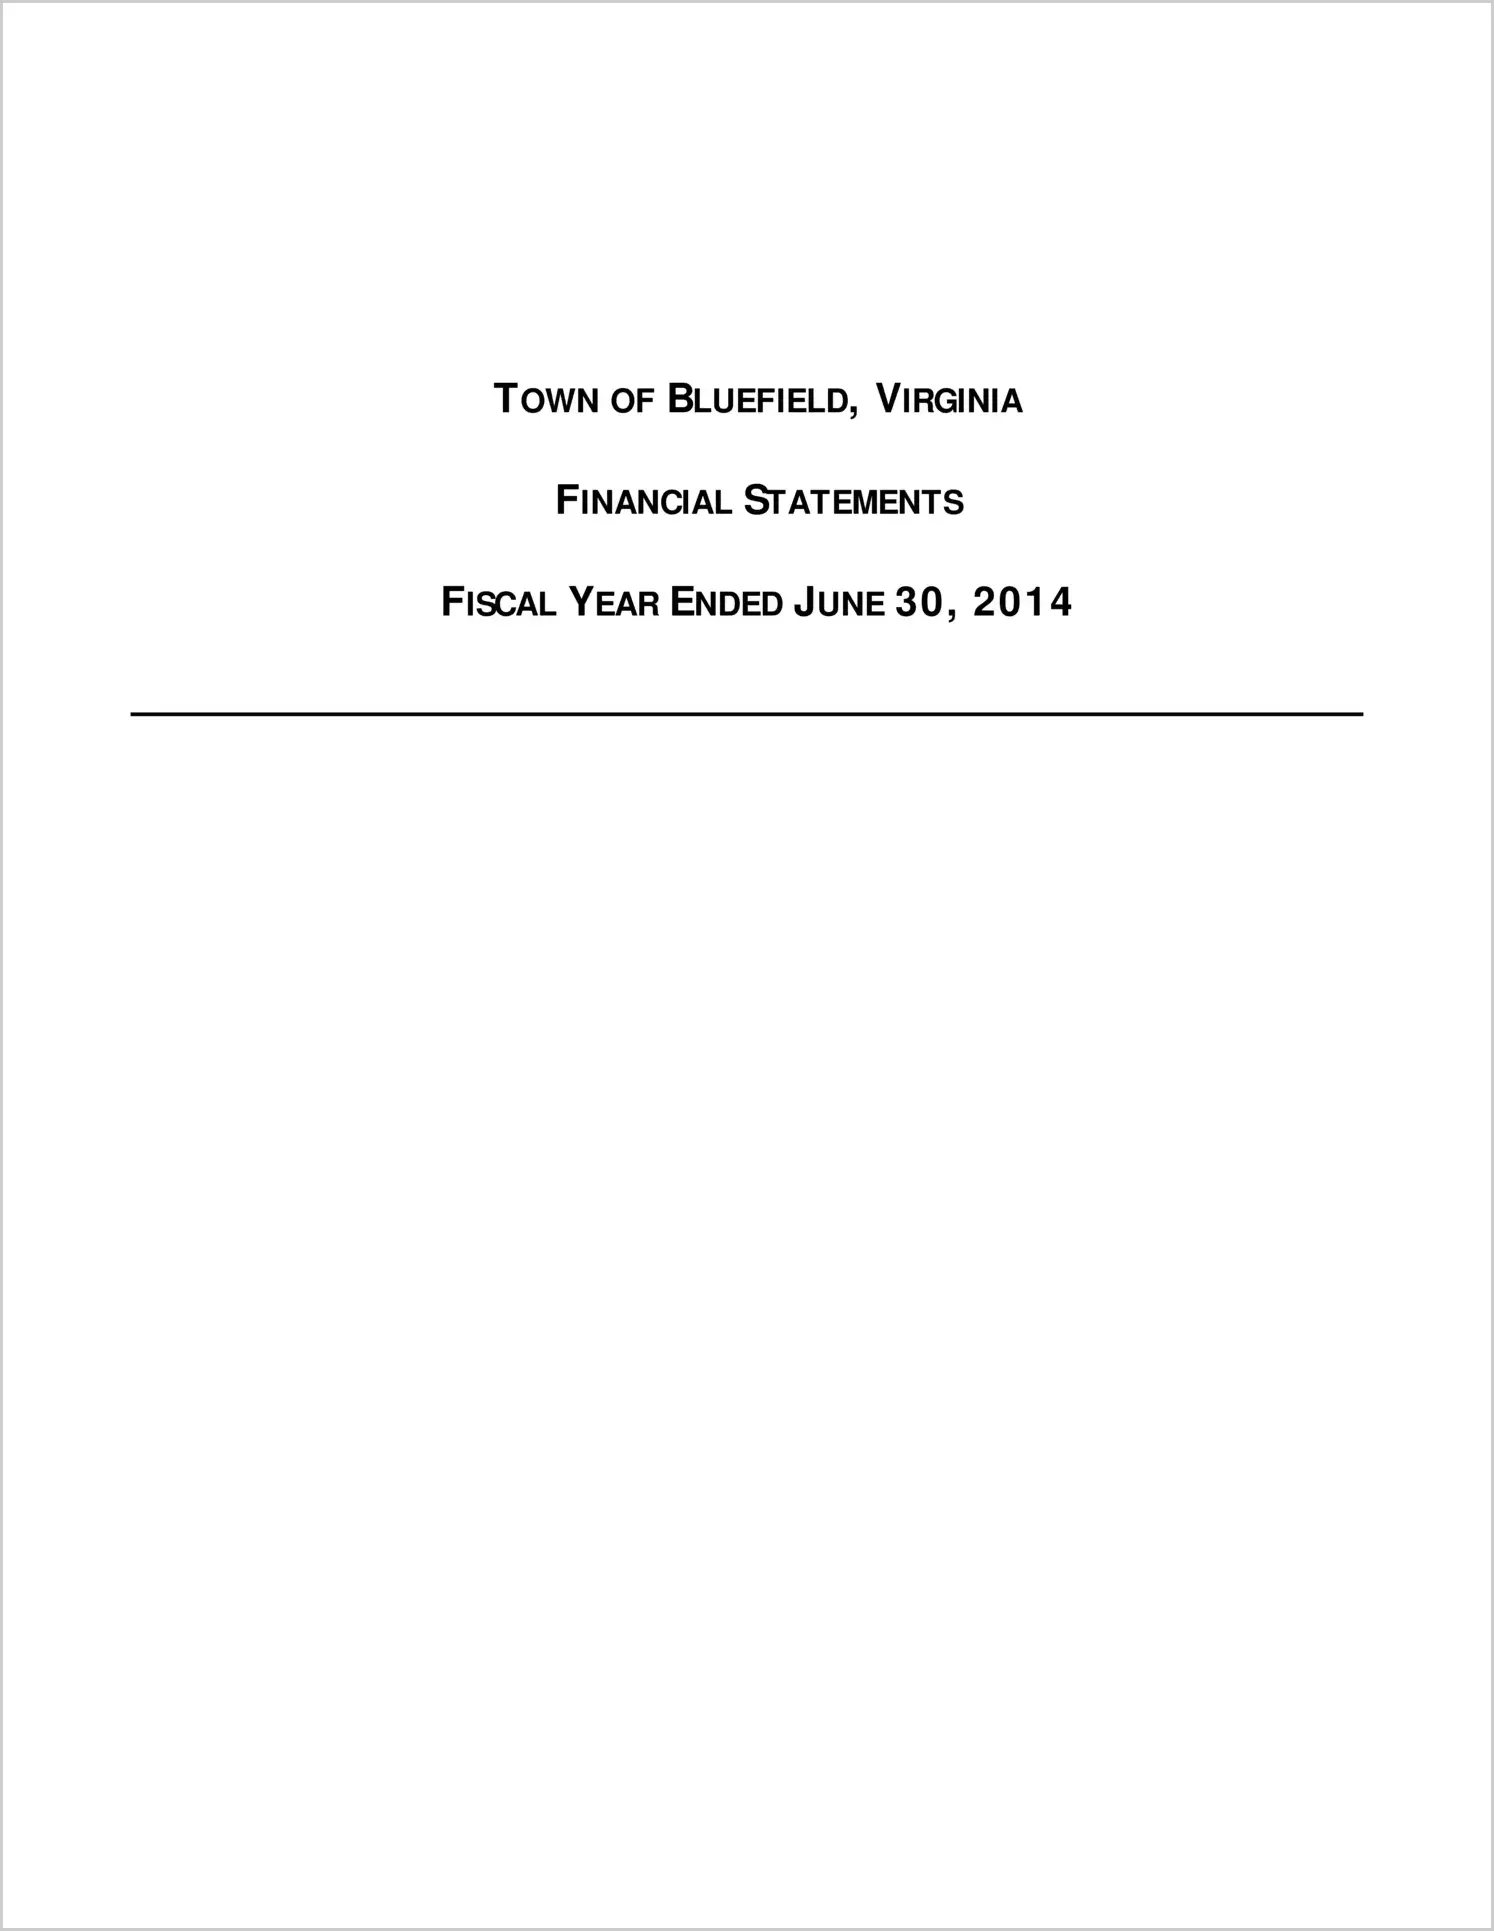 2014 Annual Financial Report for Town of Bluefield